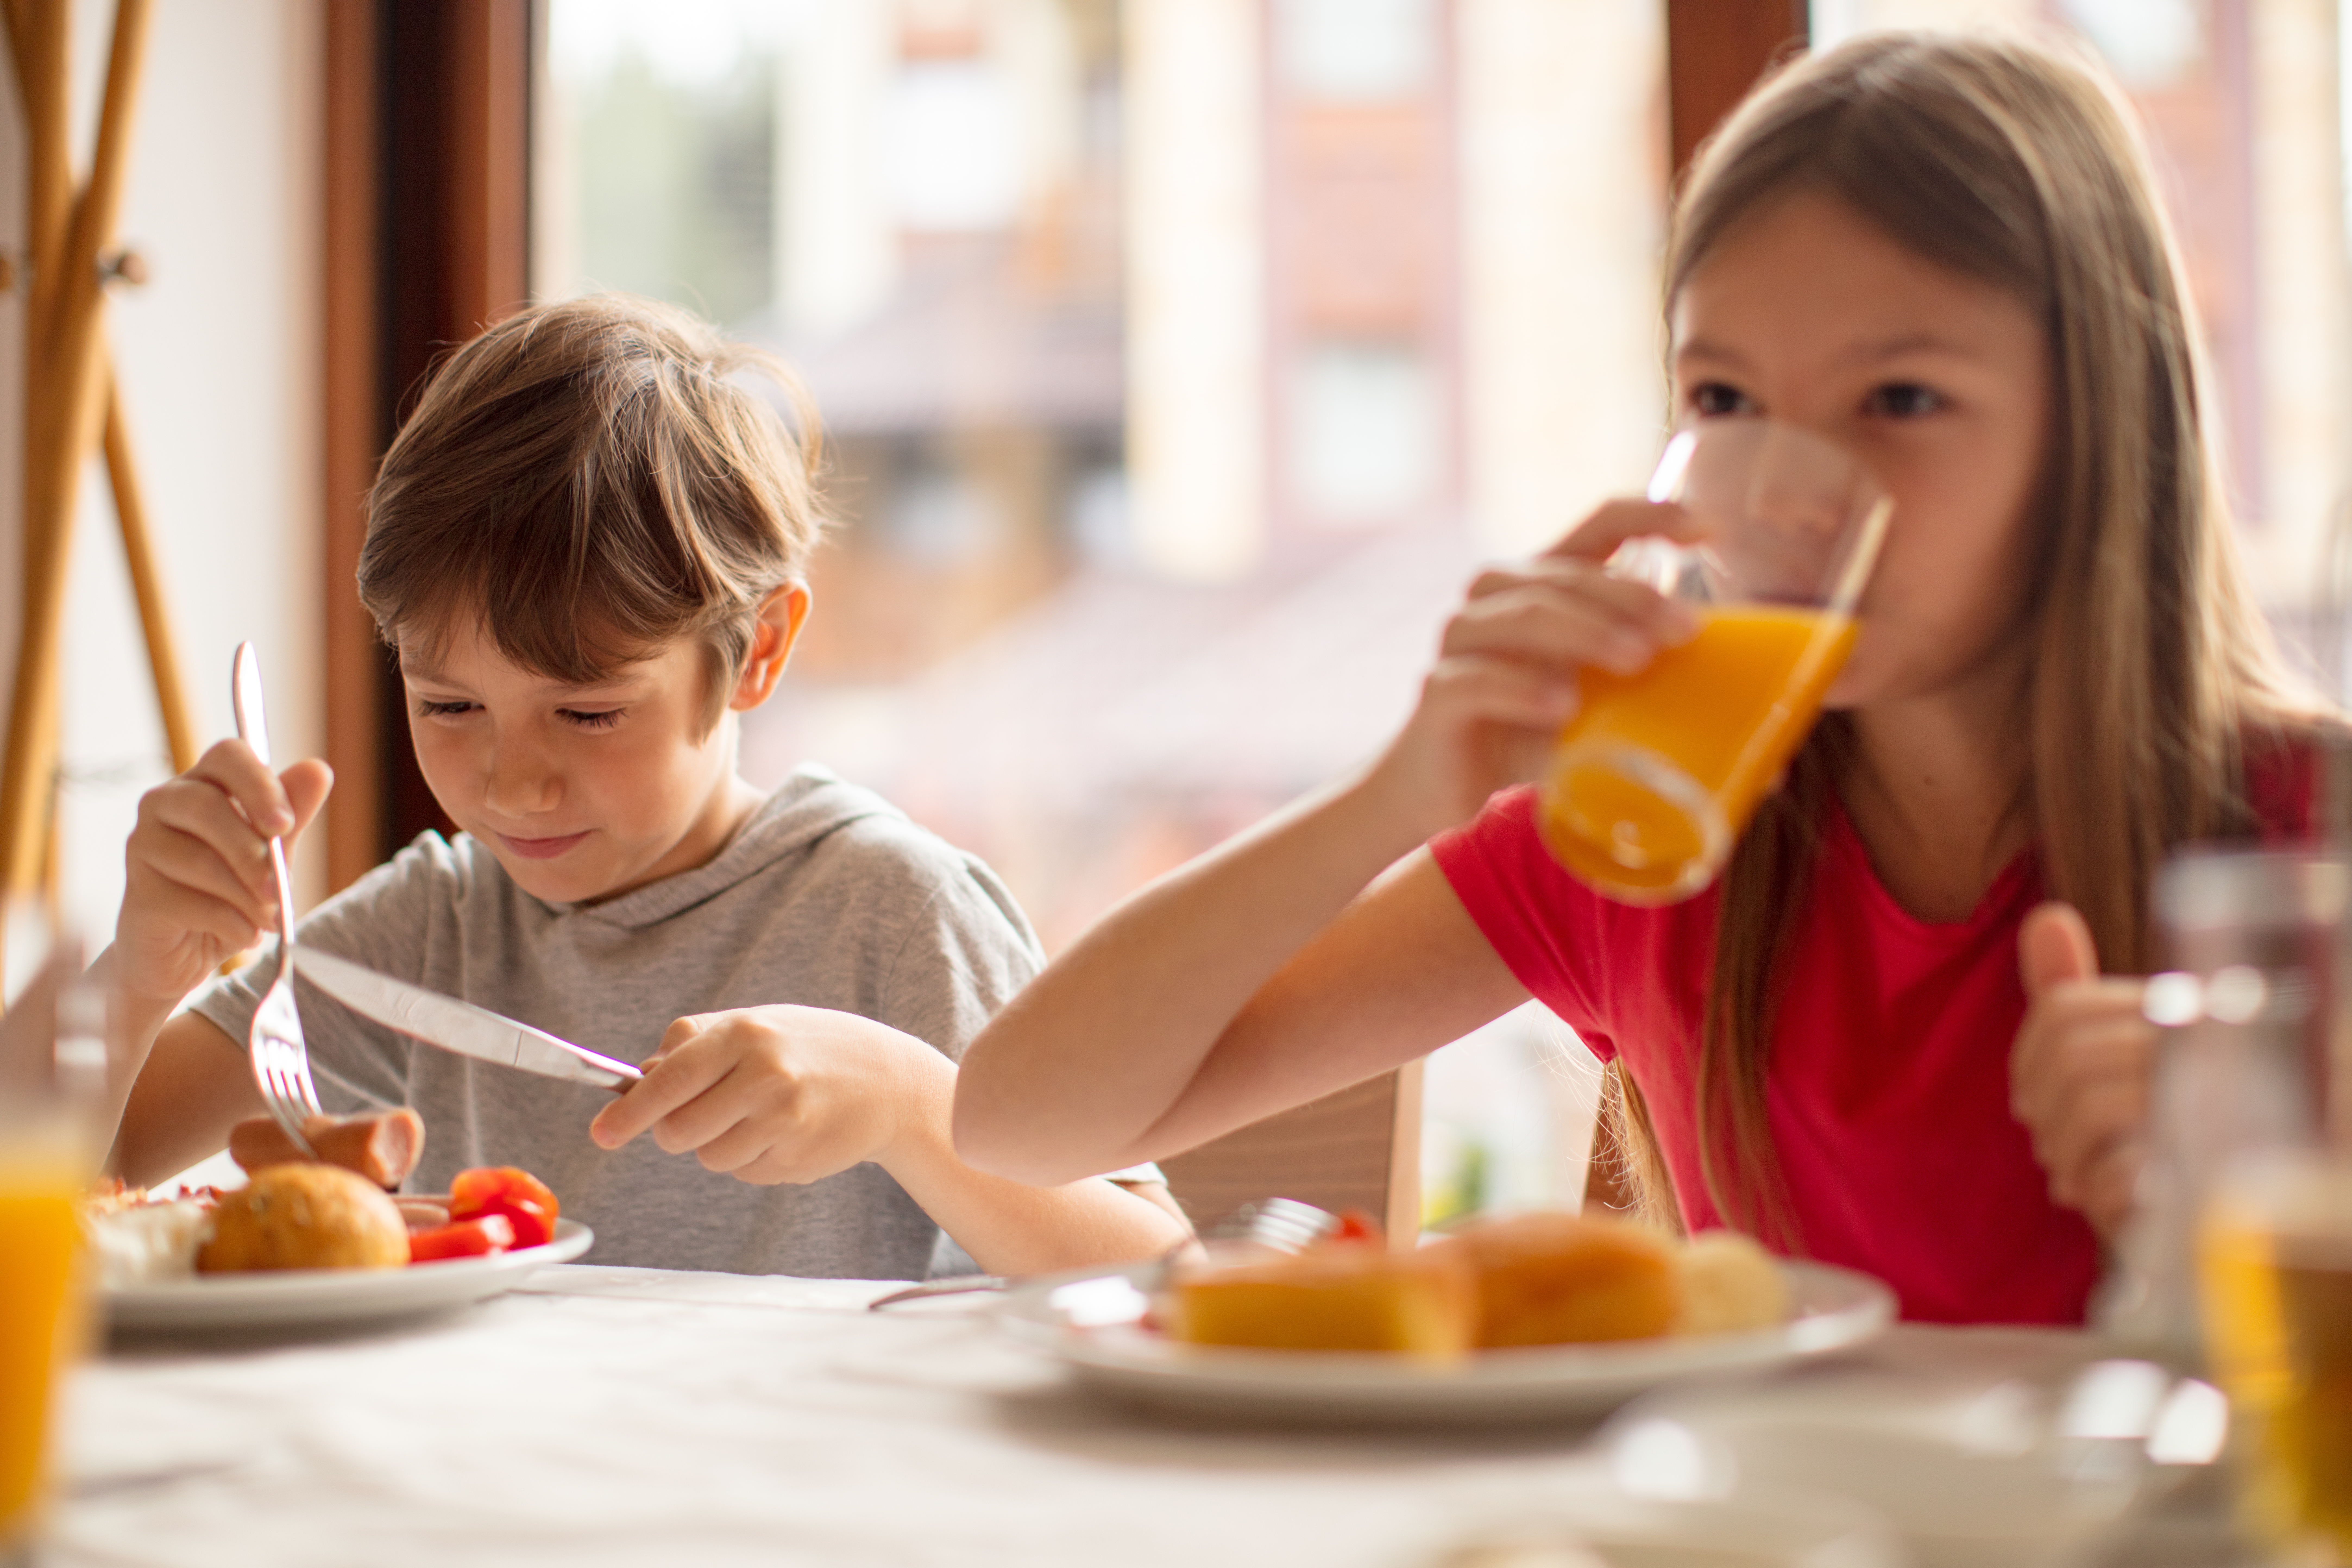 Seven ways to feed the children at no cost over the summer holidays